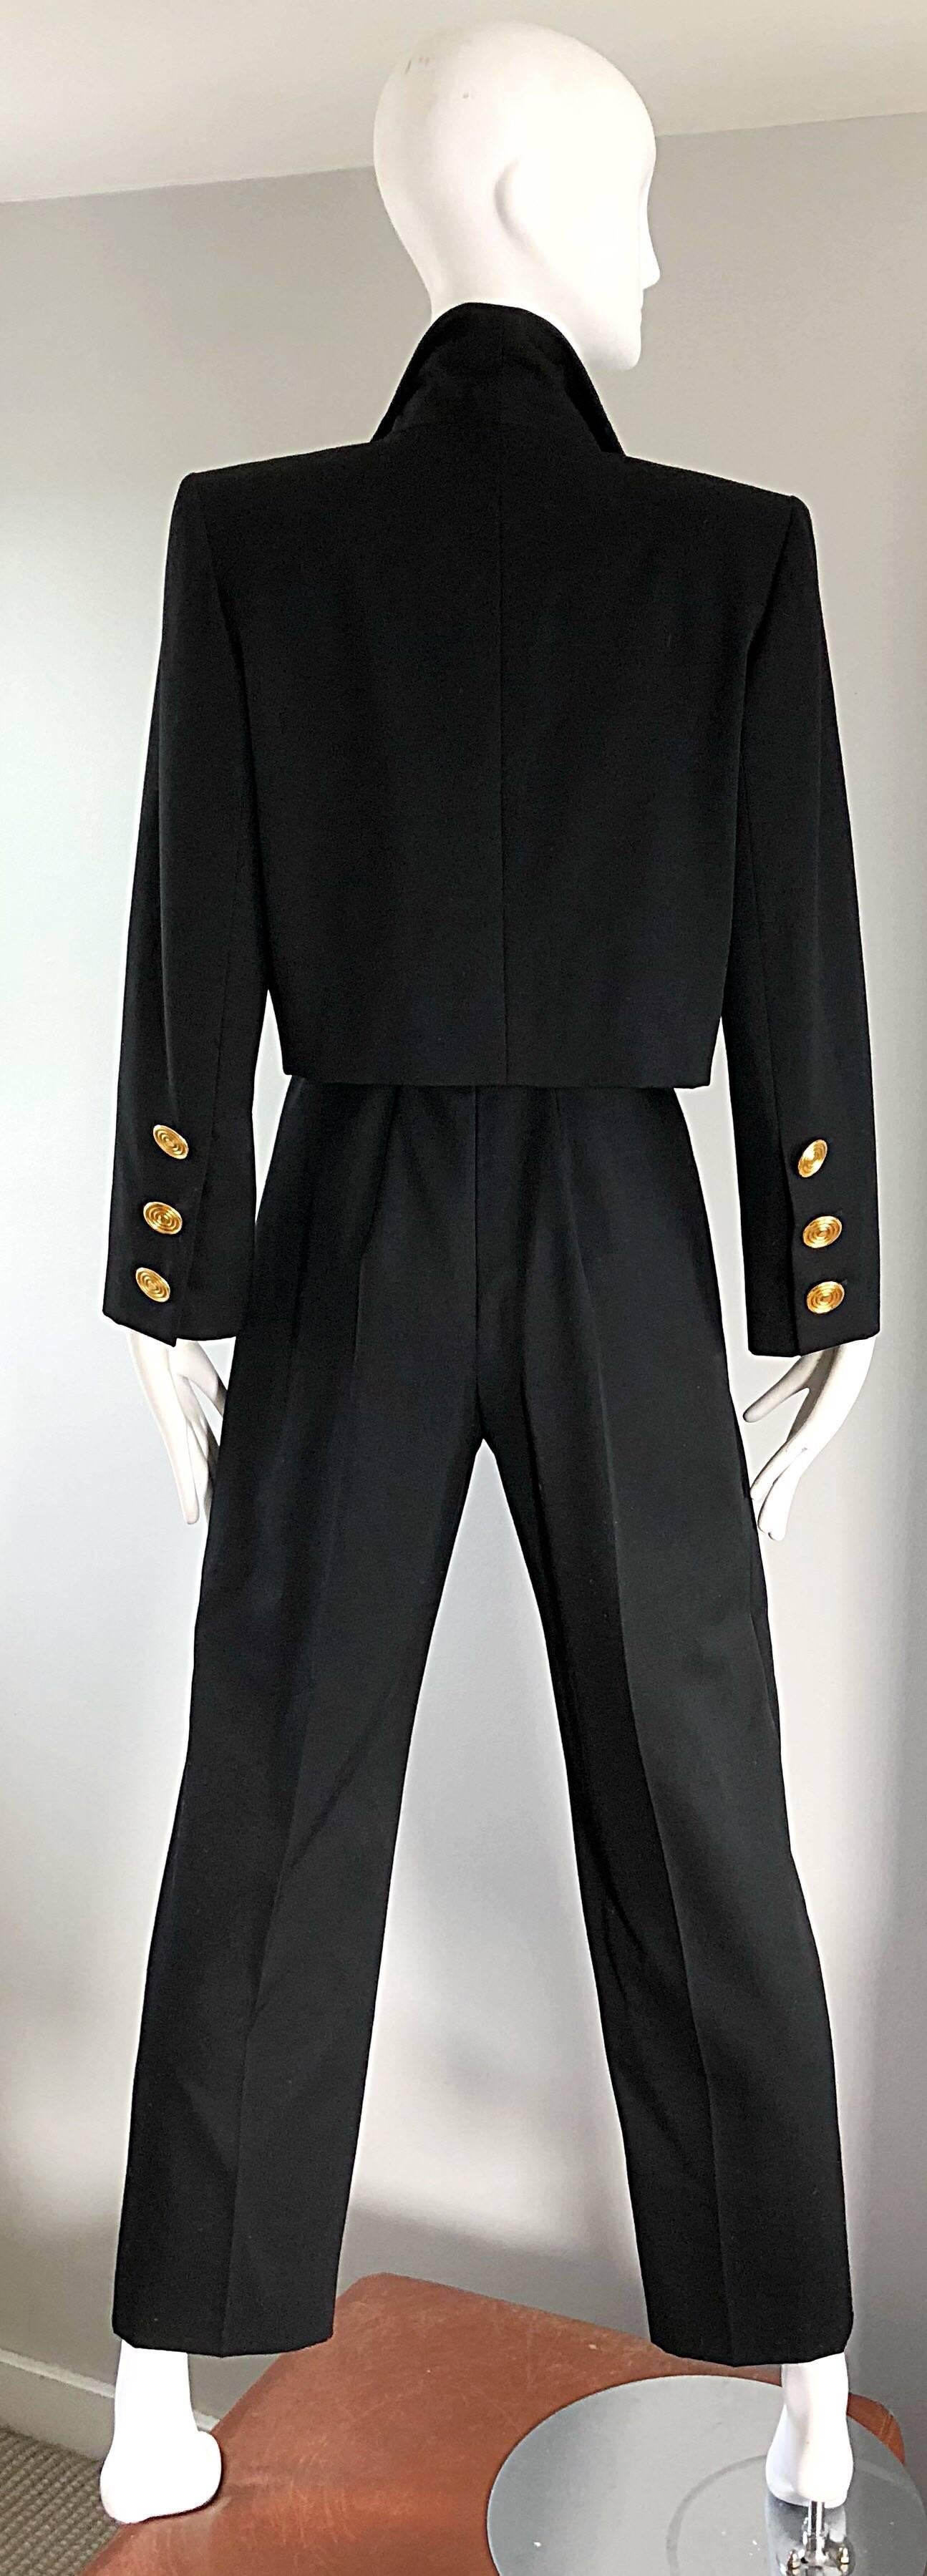 Alexander McQueen for Givenchy Couture Vintage Black Jumpsuit + Cropped Jacket  1